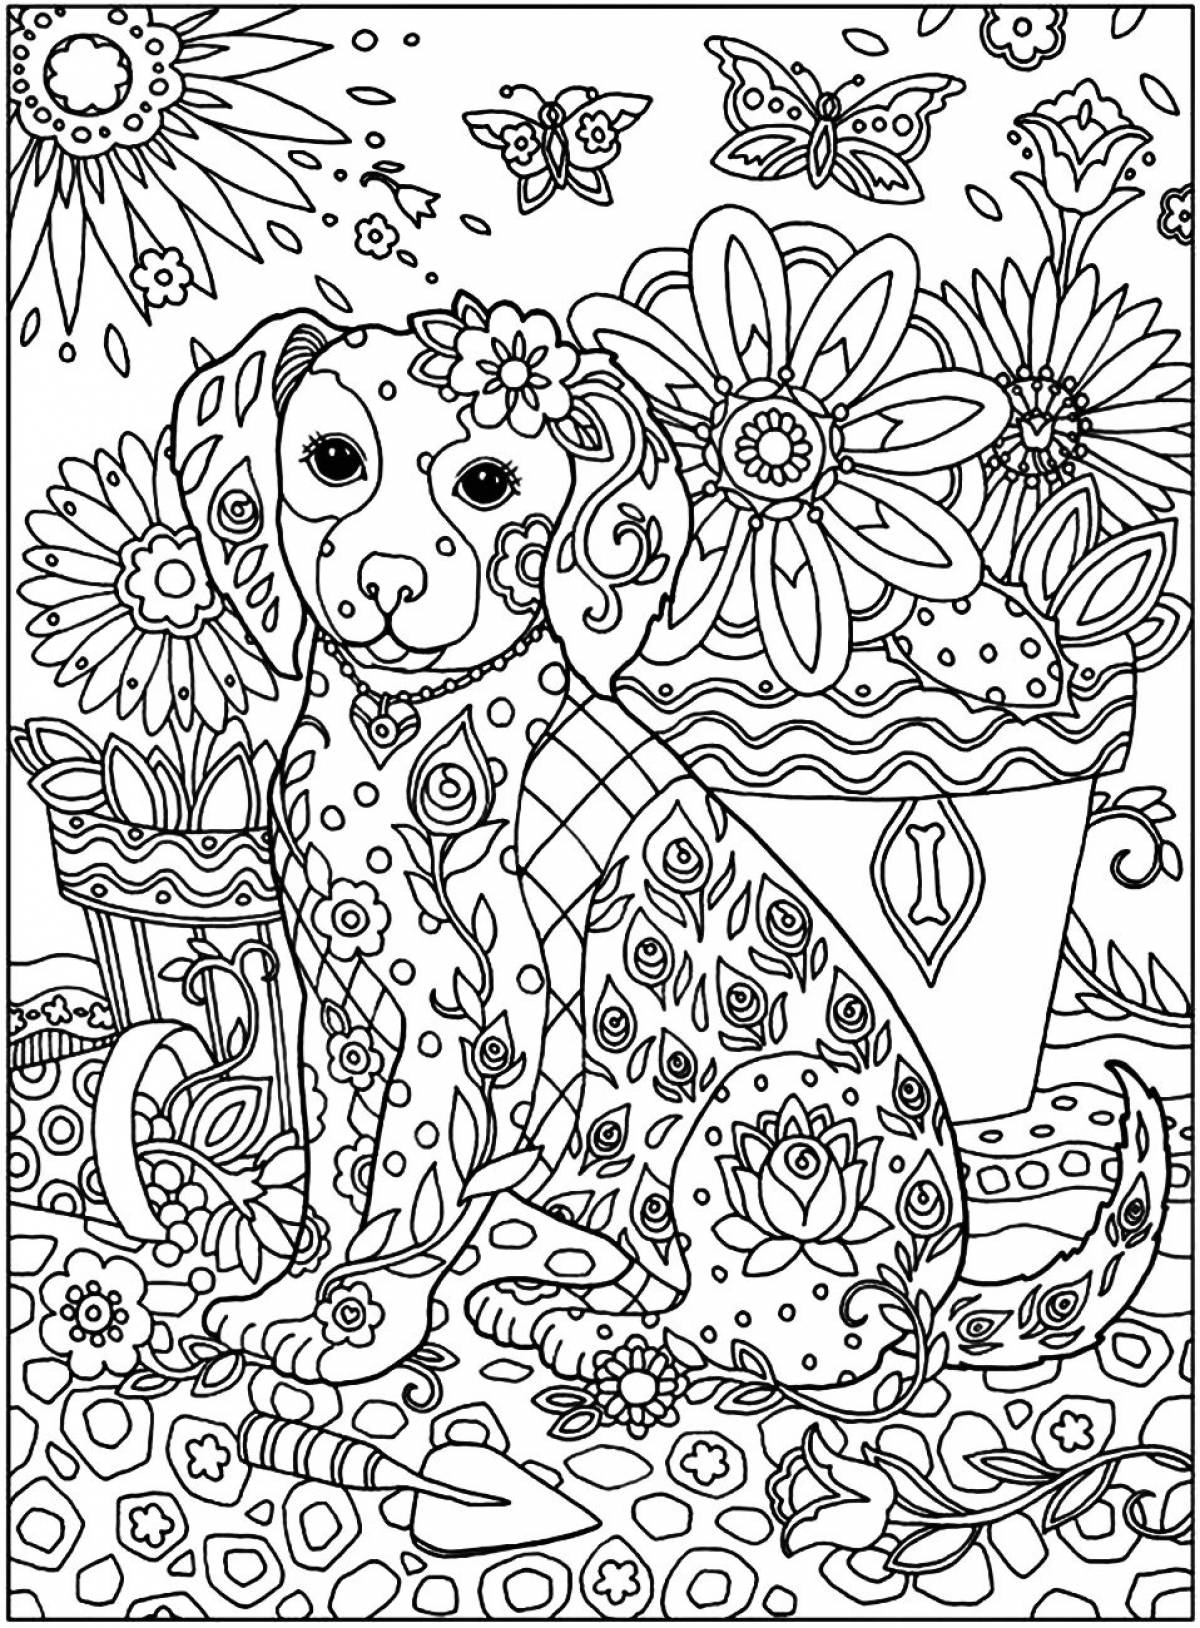 Decorated adult coloring book